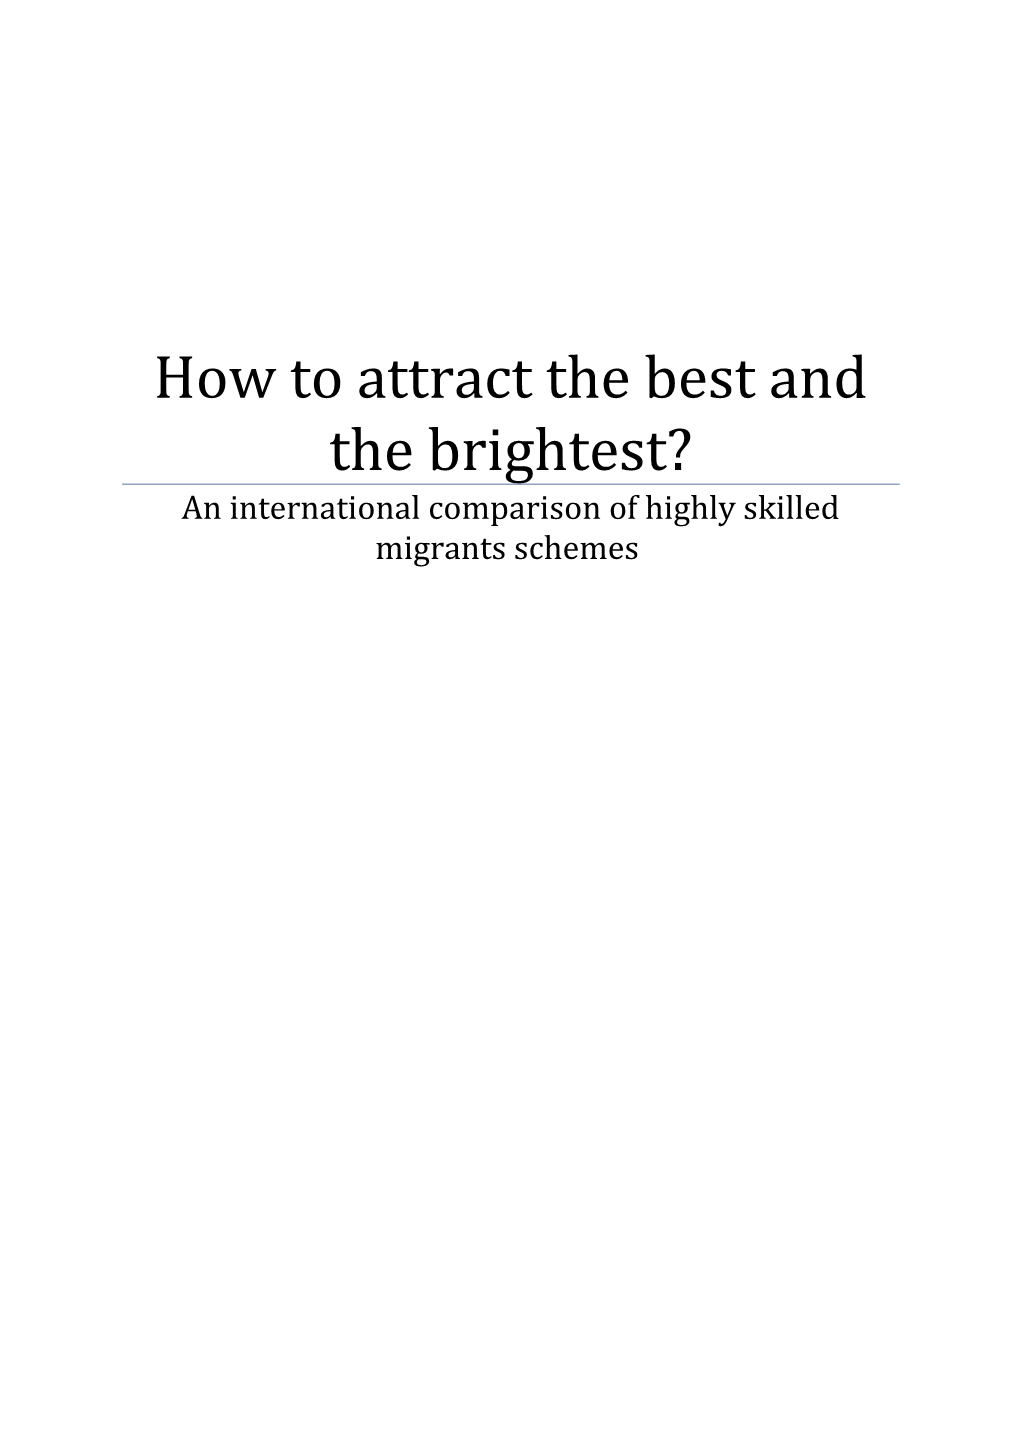 How to Attract the Best and the Brightest?